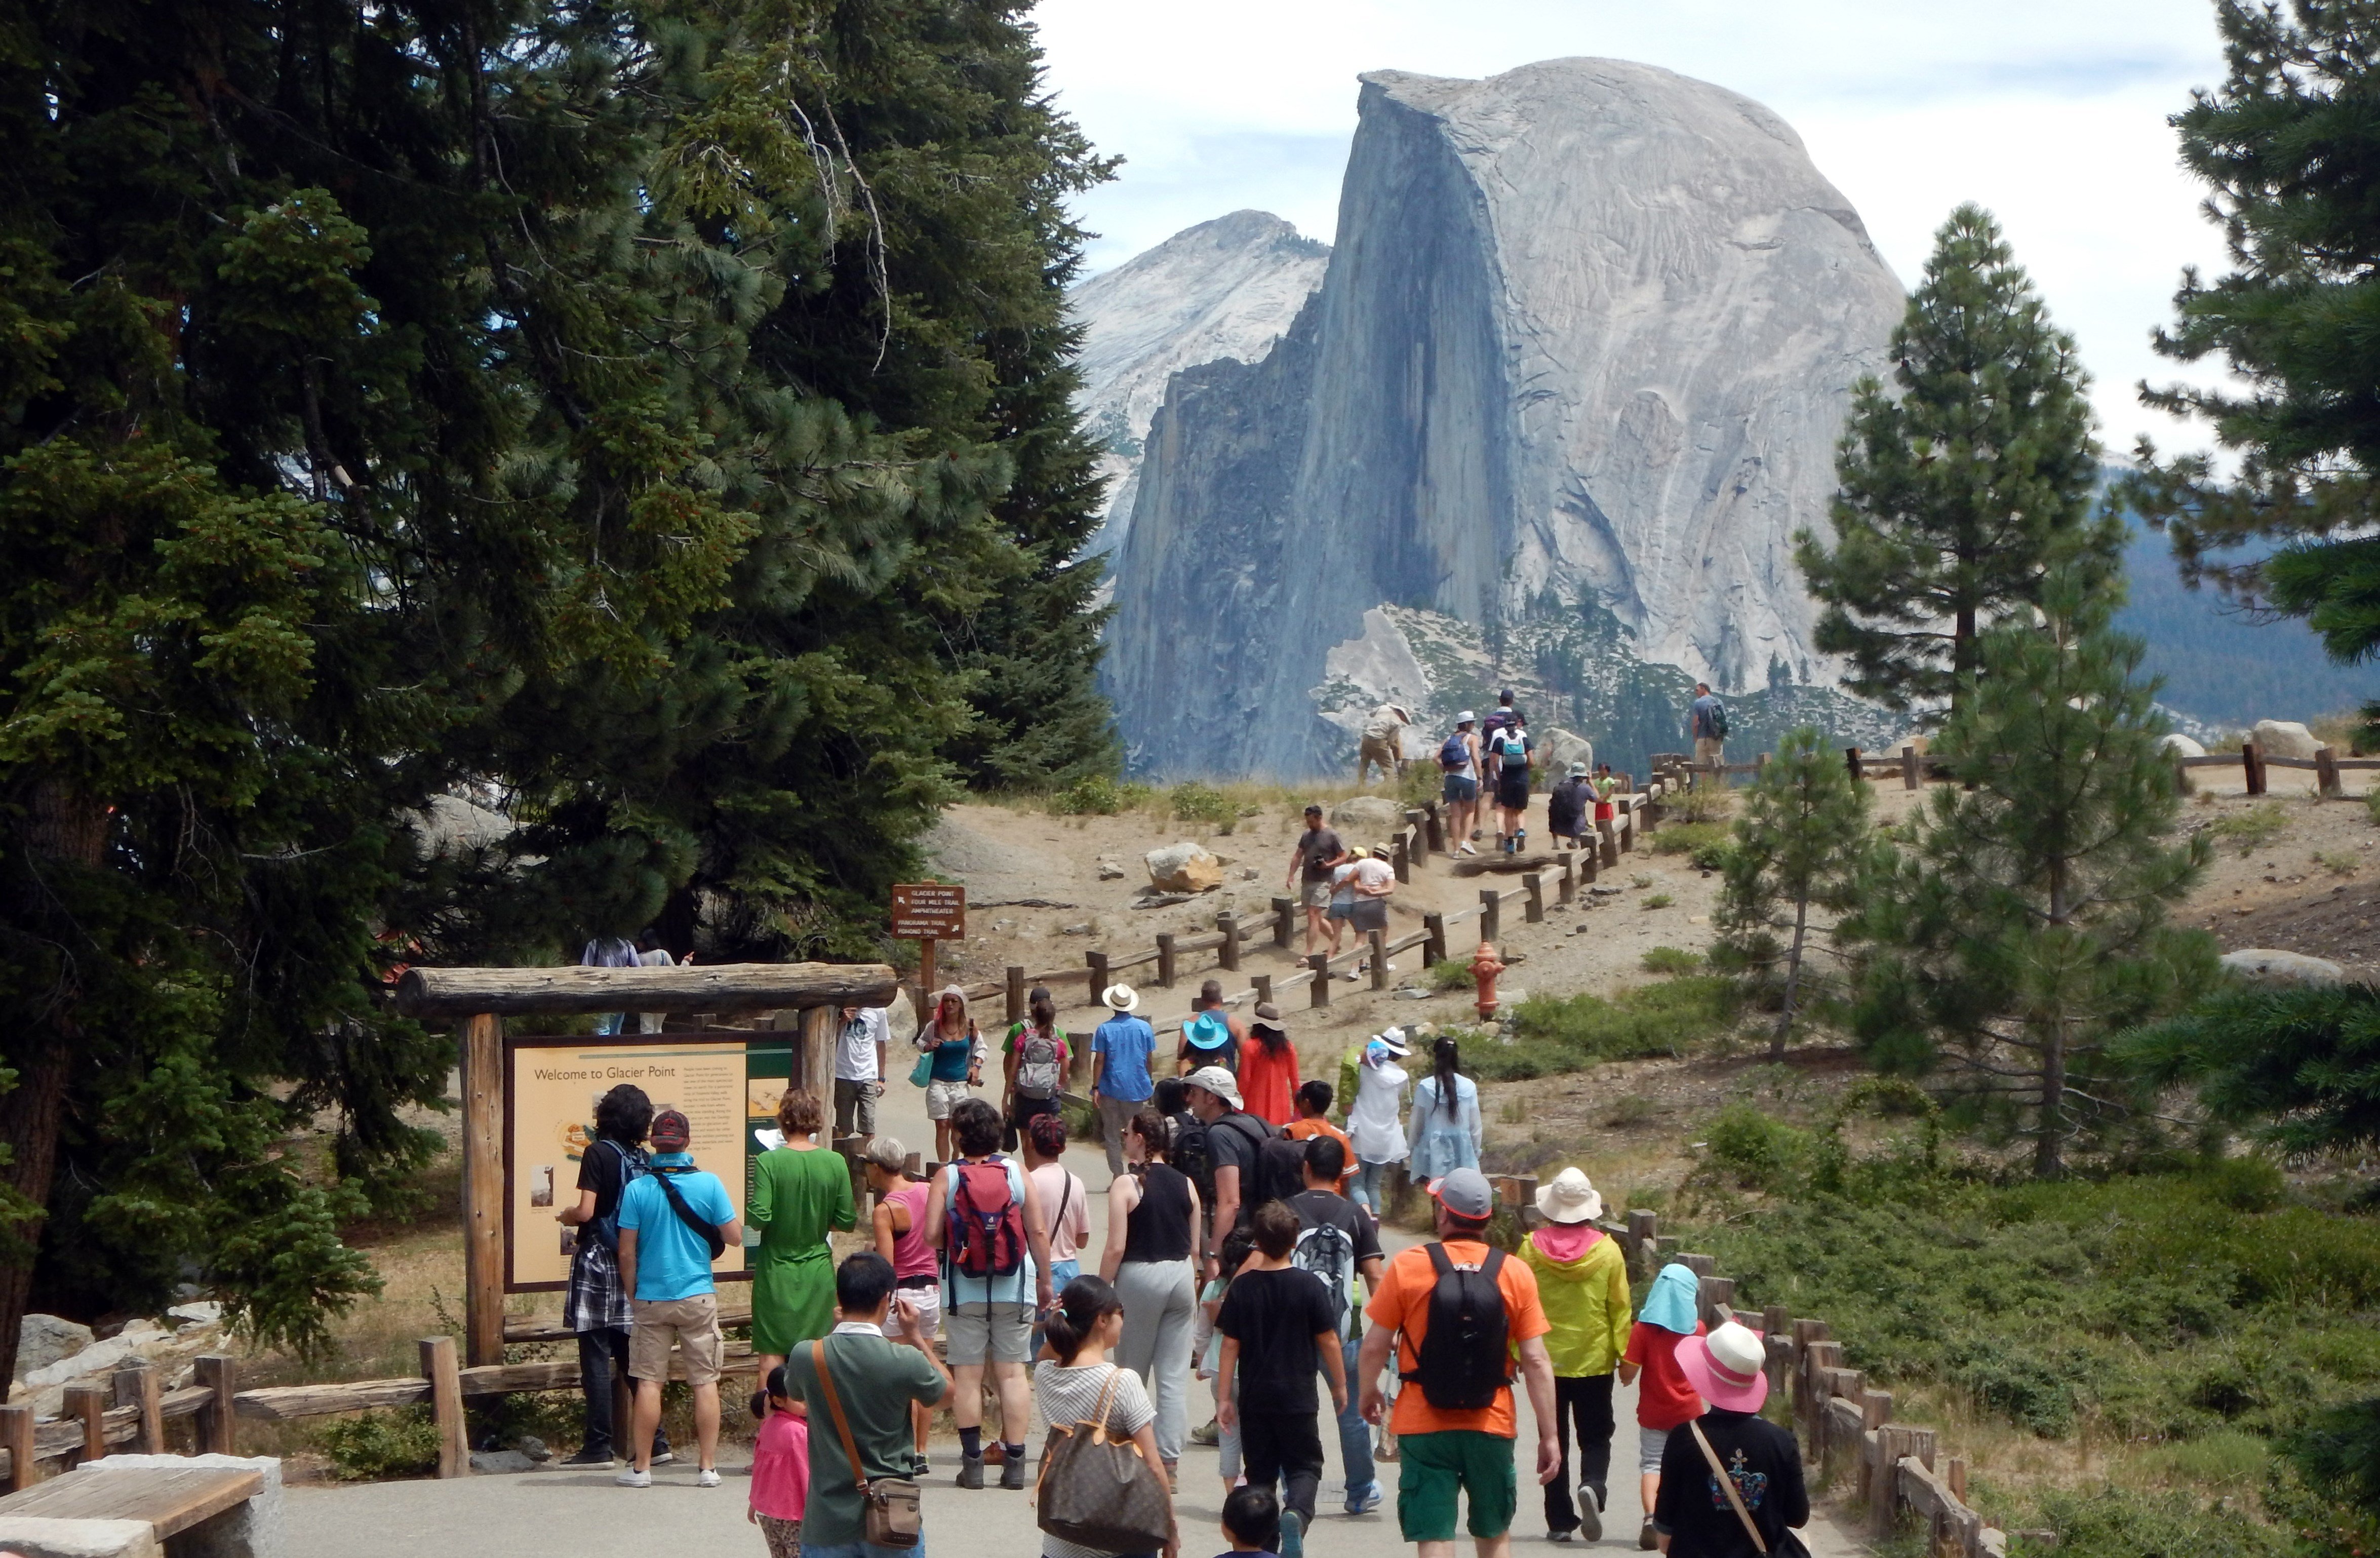 $70 Entry Fee Proposed for 17 National Parks, Including Yosemite and ...